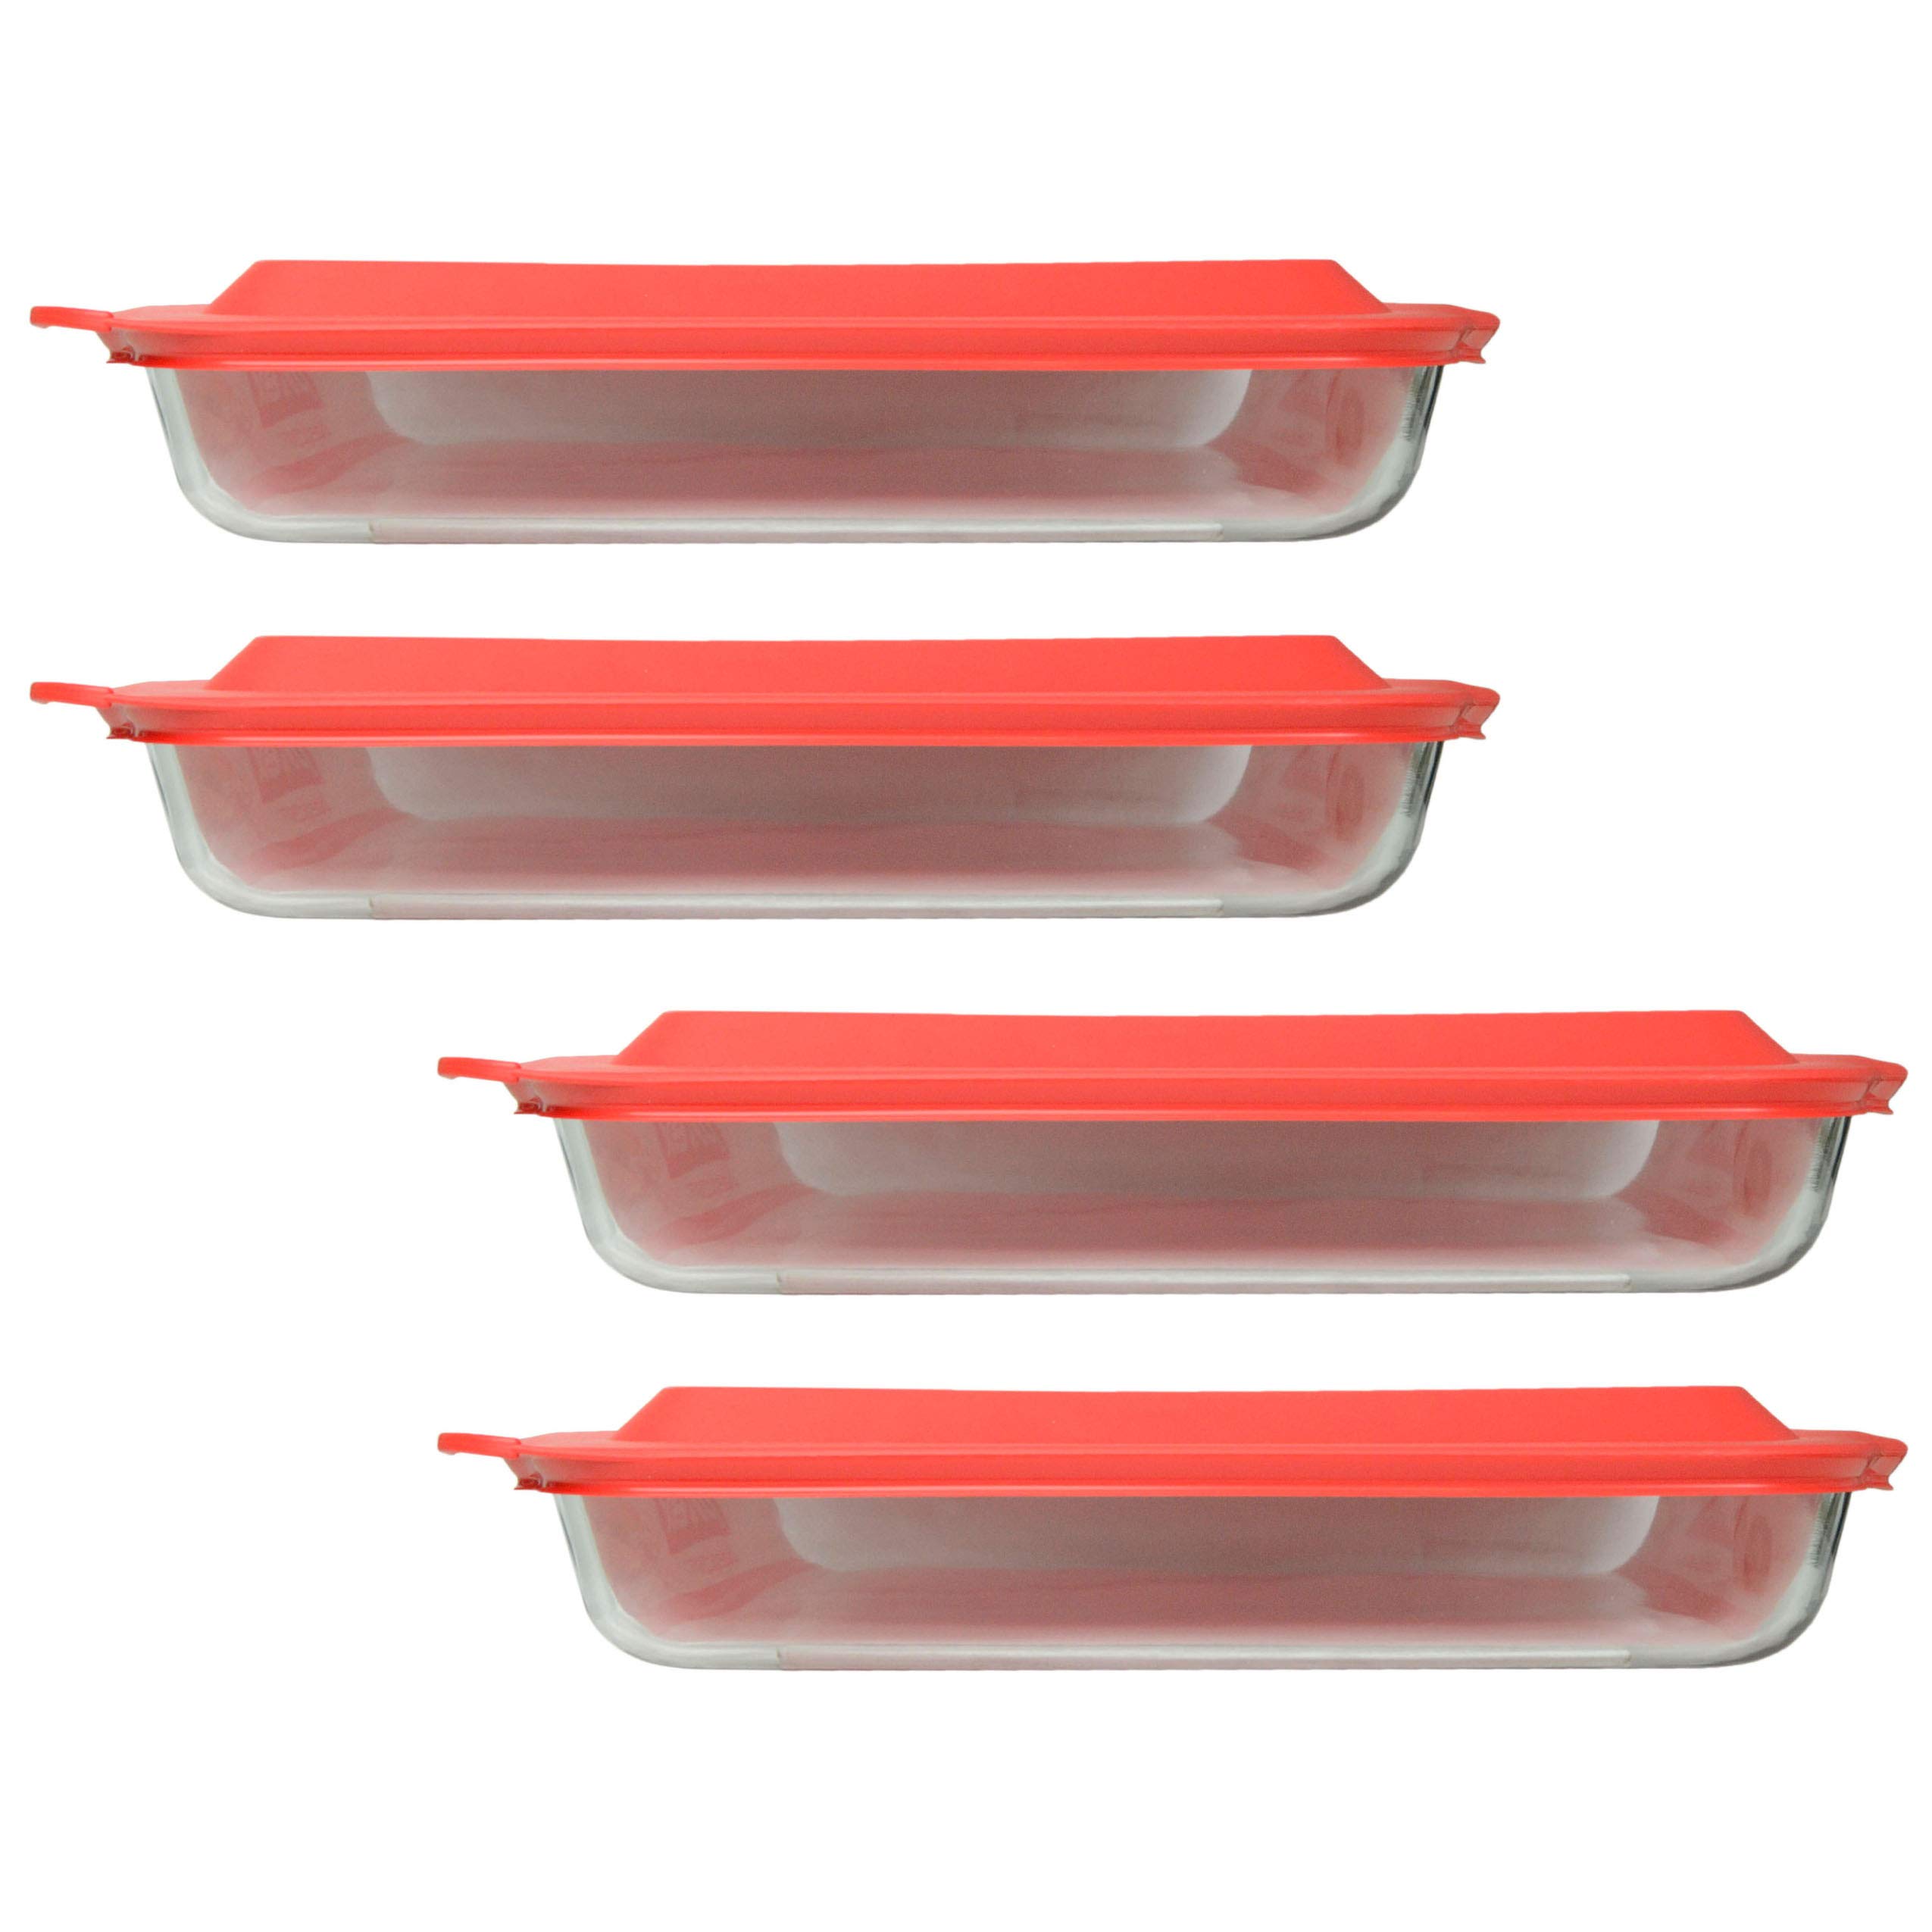 Pyrex 4 233 Oblong Rectangle Clear Glass Casserole Baking Dishes 4 233-PC Red Lids Made in the USA